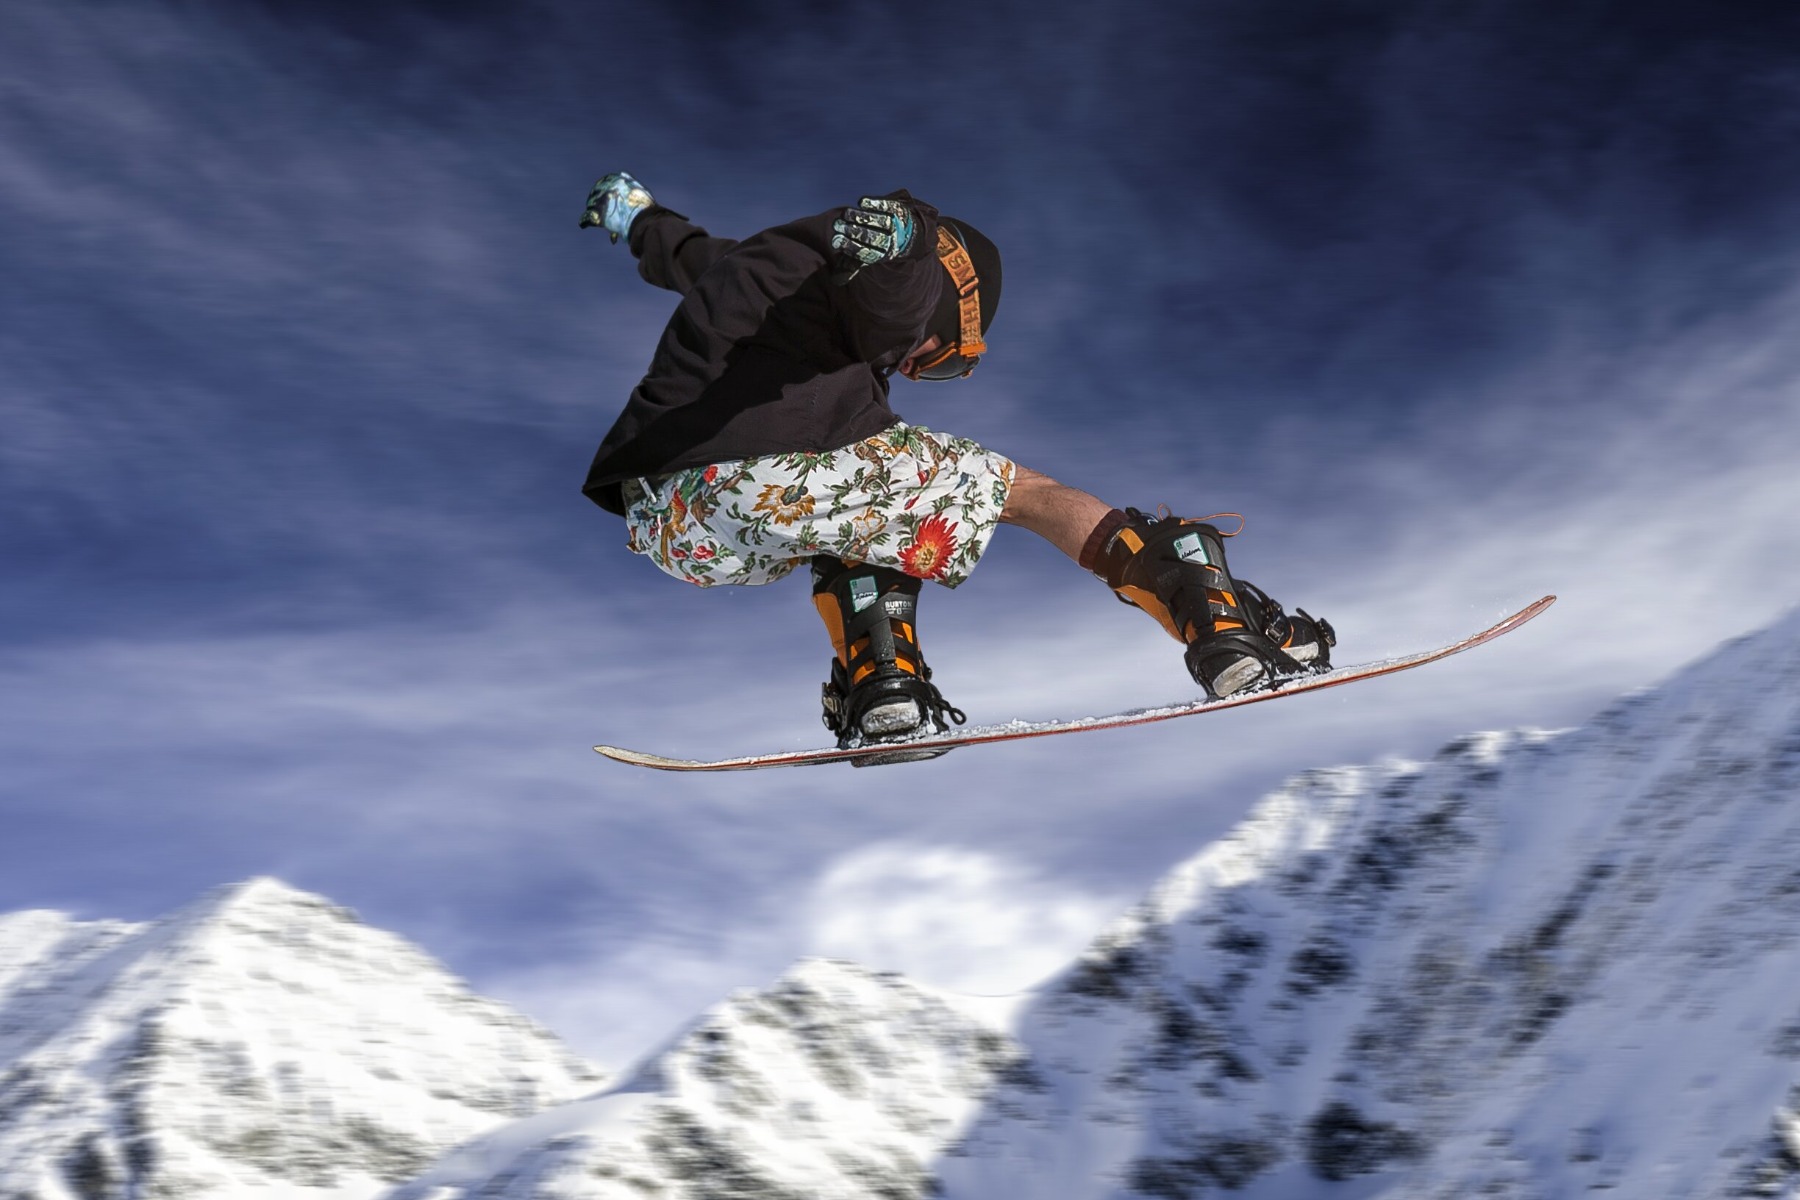 Man wearing floral shorts flying through air on snowboard